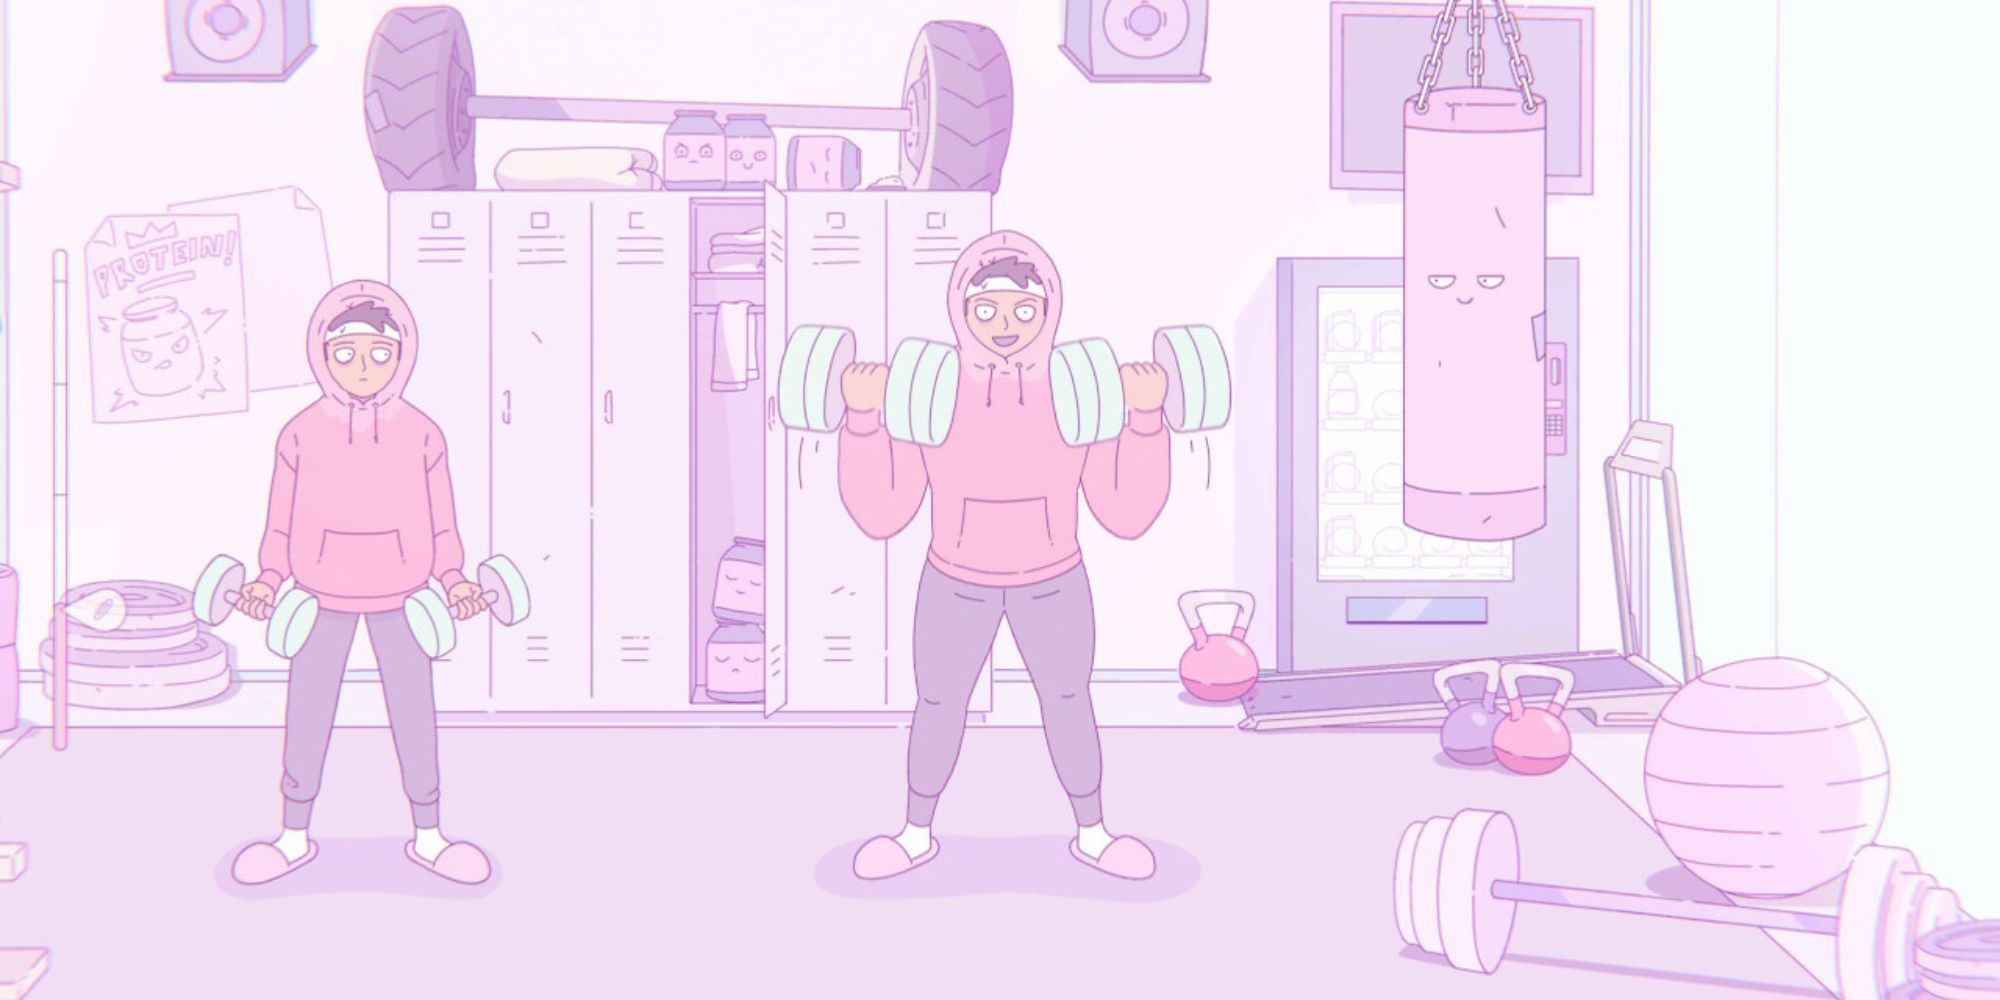 Two guys wearing pink sweaters lift weights in a gym in Melatonin